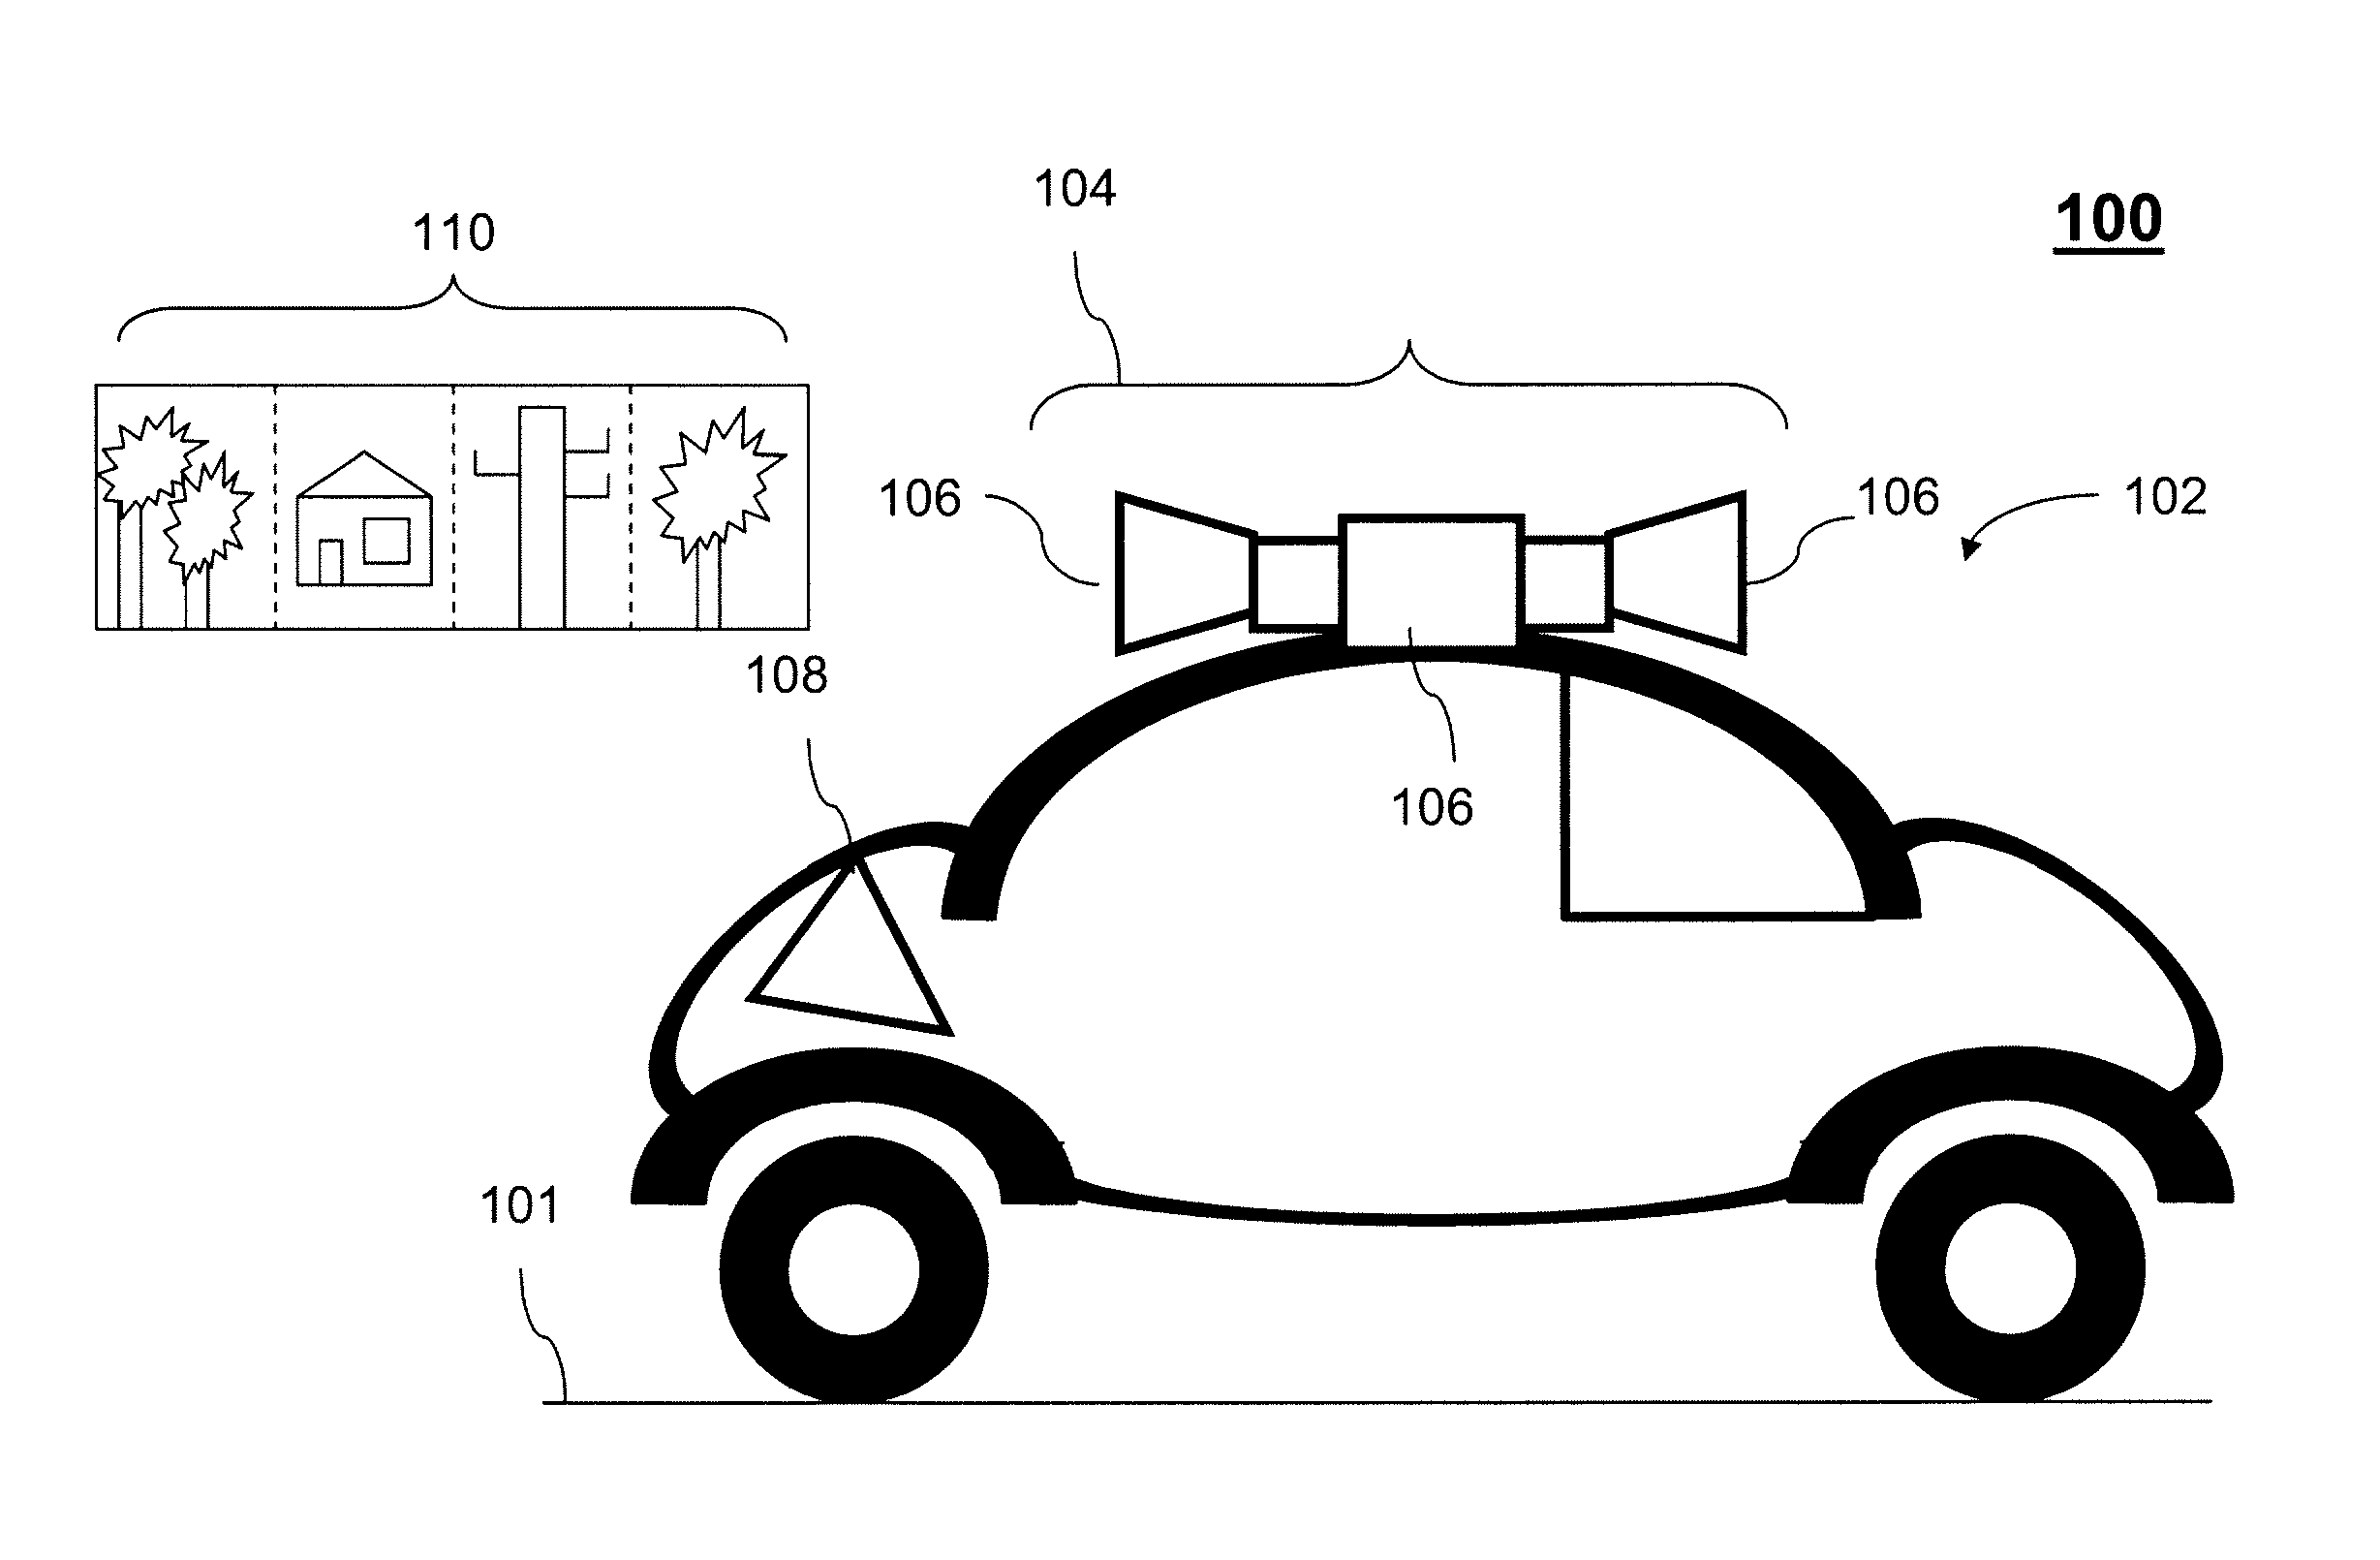 Estimation of panoramic camera orientation relative to a vehicle coordinate frame